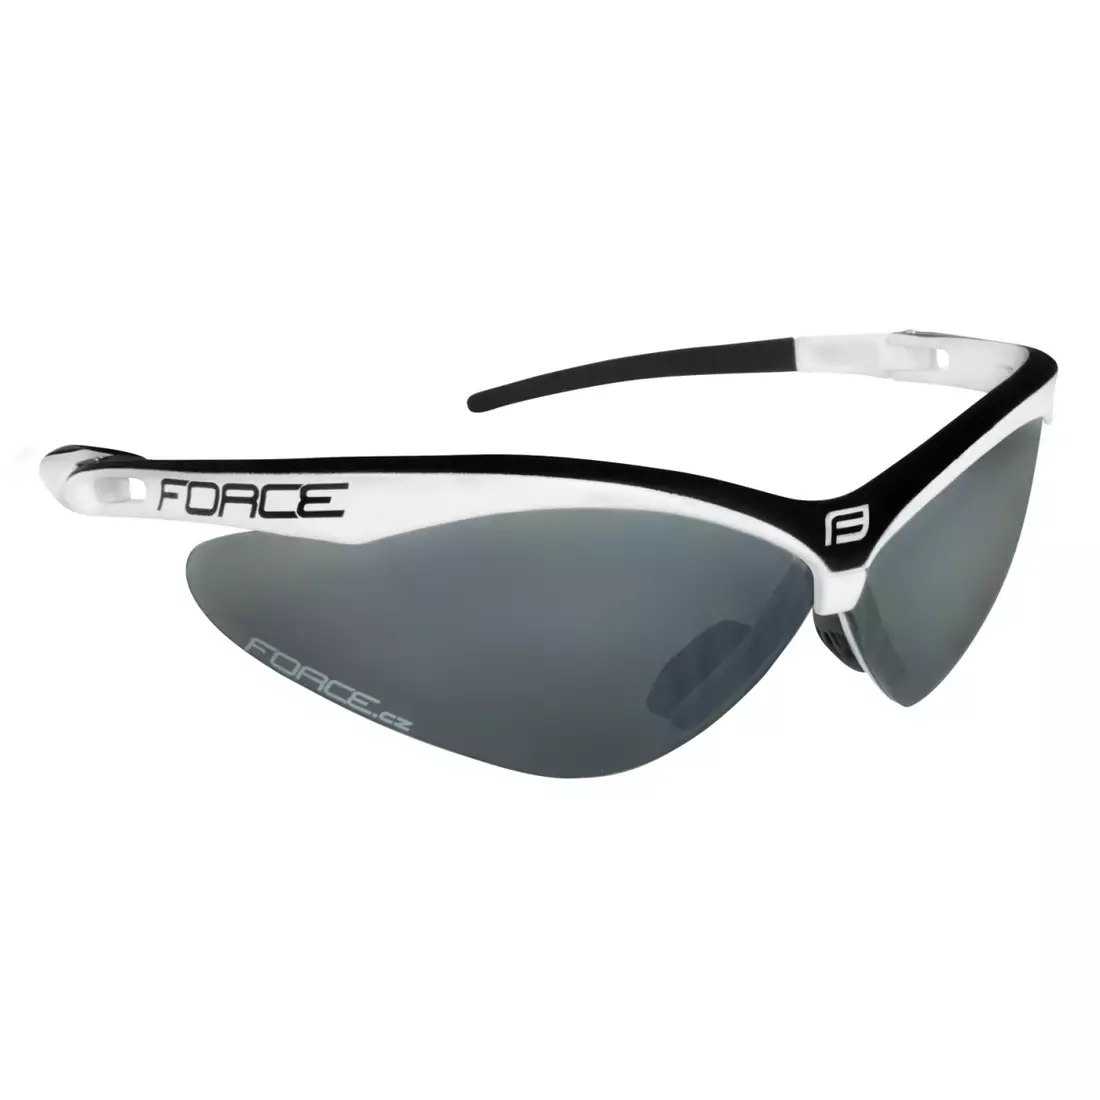 FORCE AIR glasses with interchangeable lenses, white and black 91041